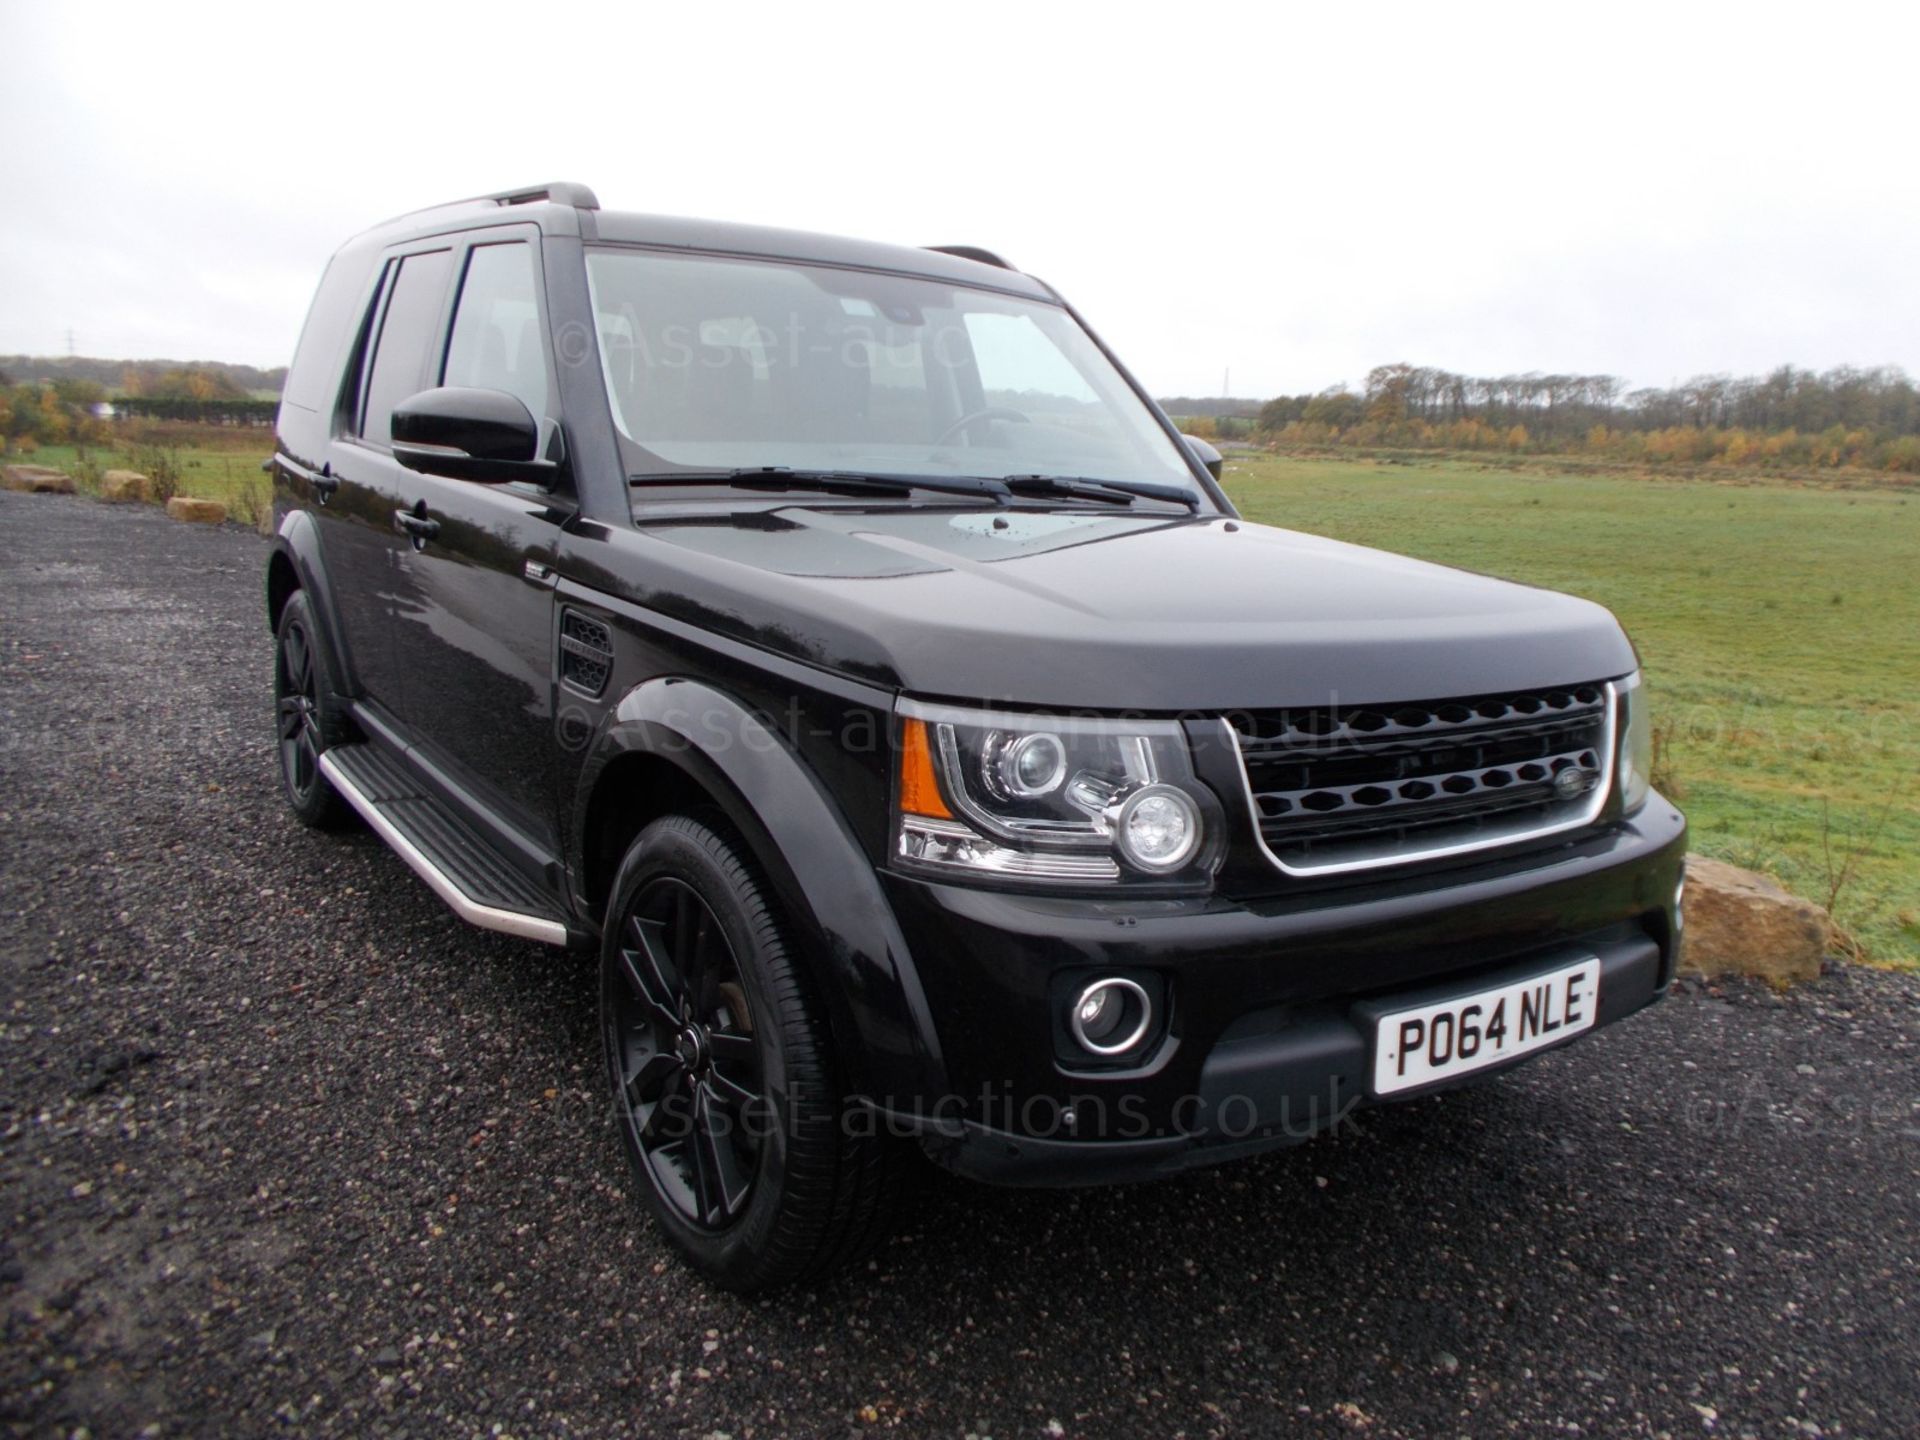 2015/64 LAND ROVER DISCOVERY HSE LUXURY SCV6 7 SEATER, 3.0 V6 PETROL SUPERCHARGED *NO VAT* - Image 2 of 27